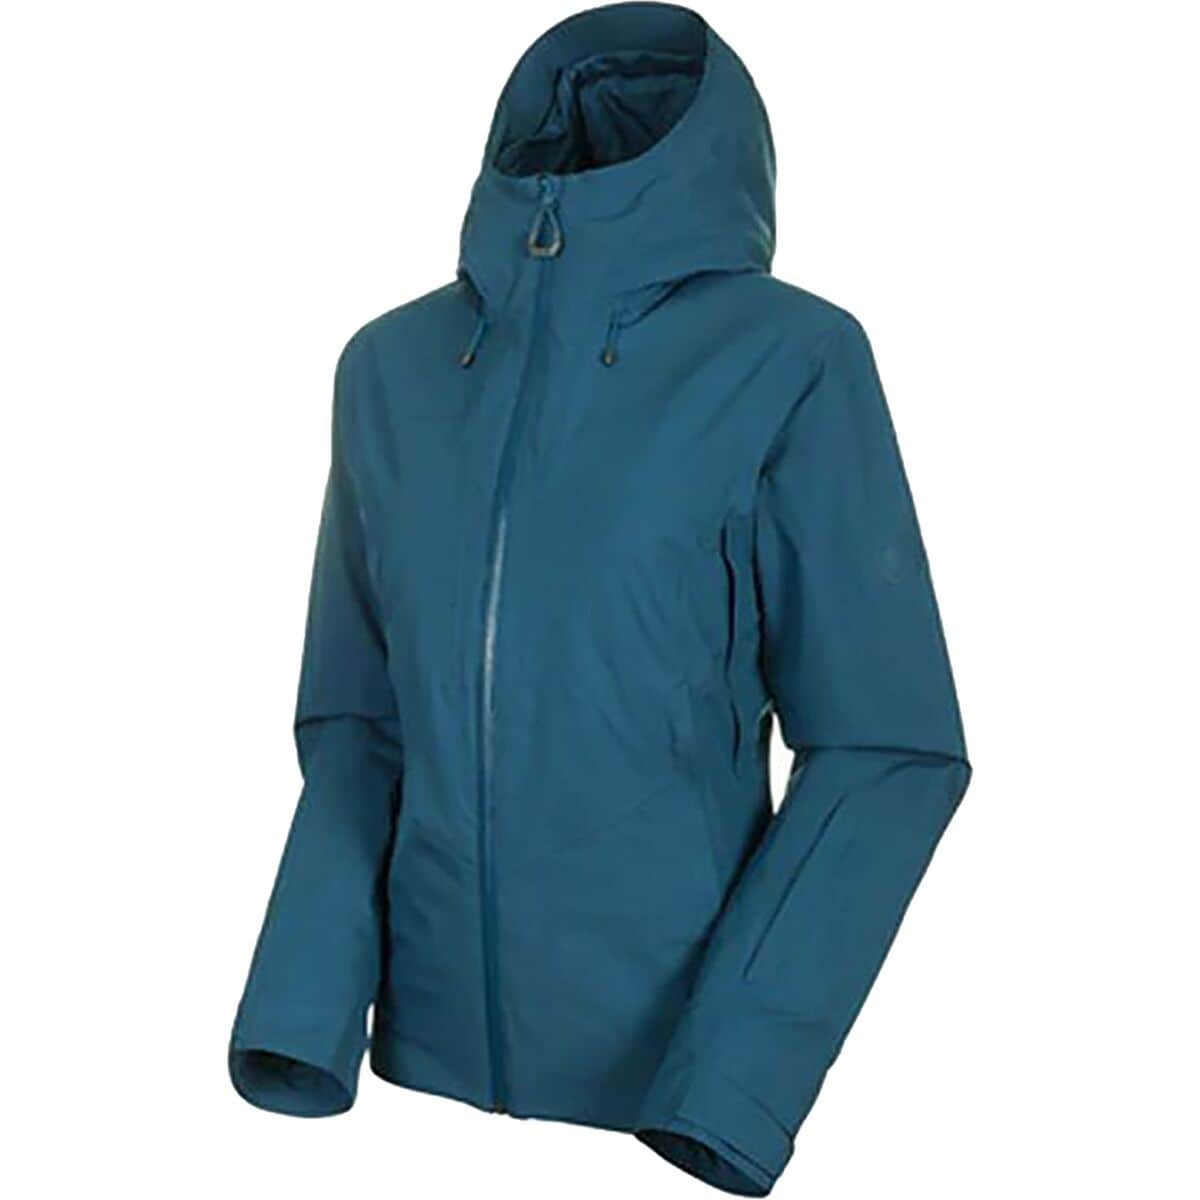 Mammut Casanna HS Thermo Hooded Jacket - Women's Wing Teal